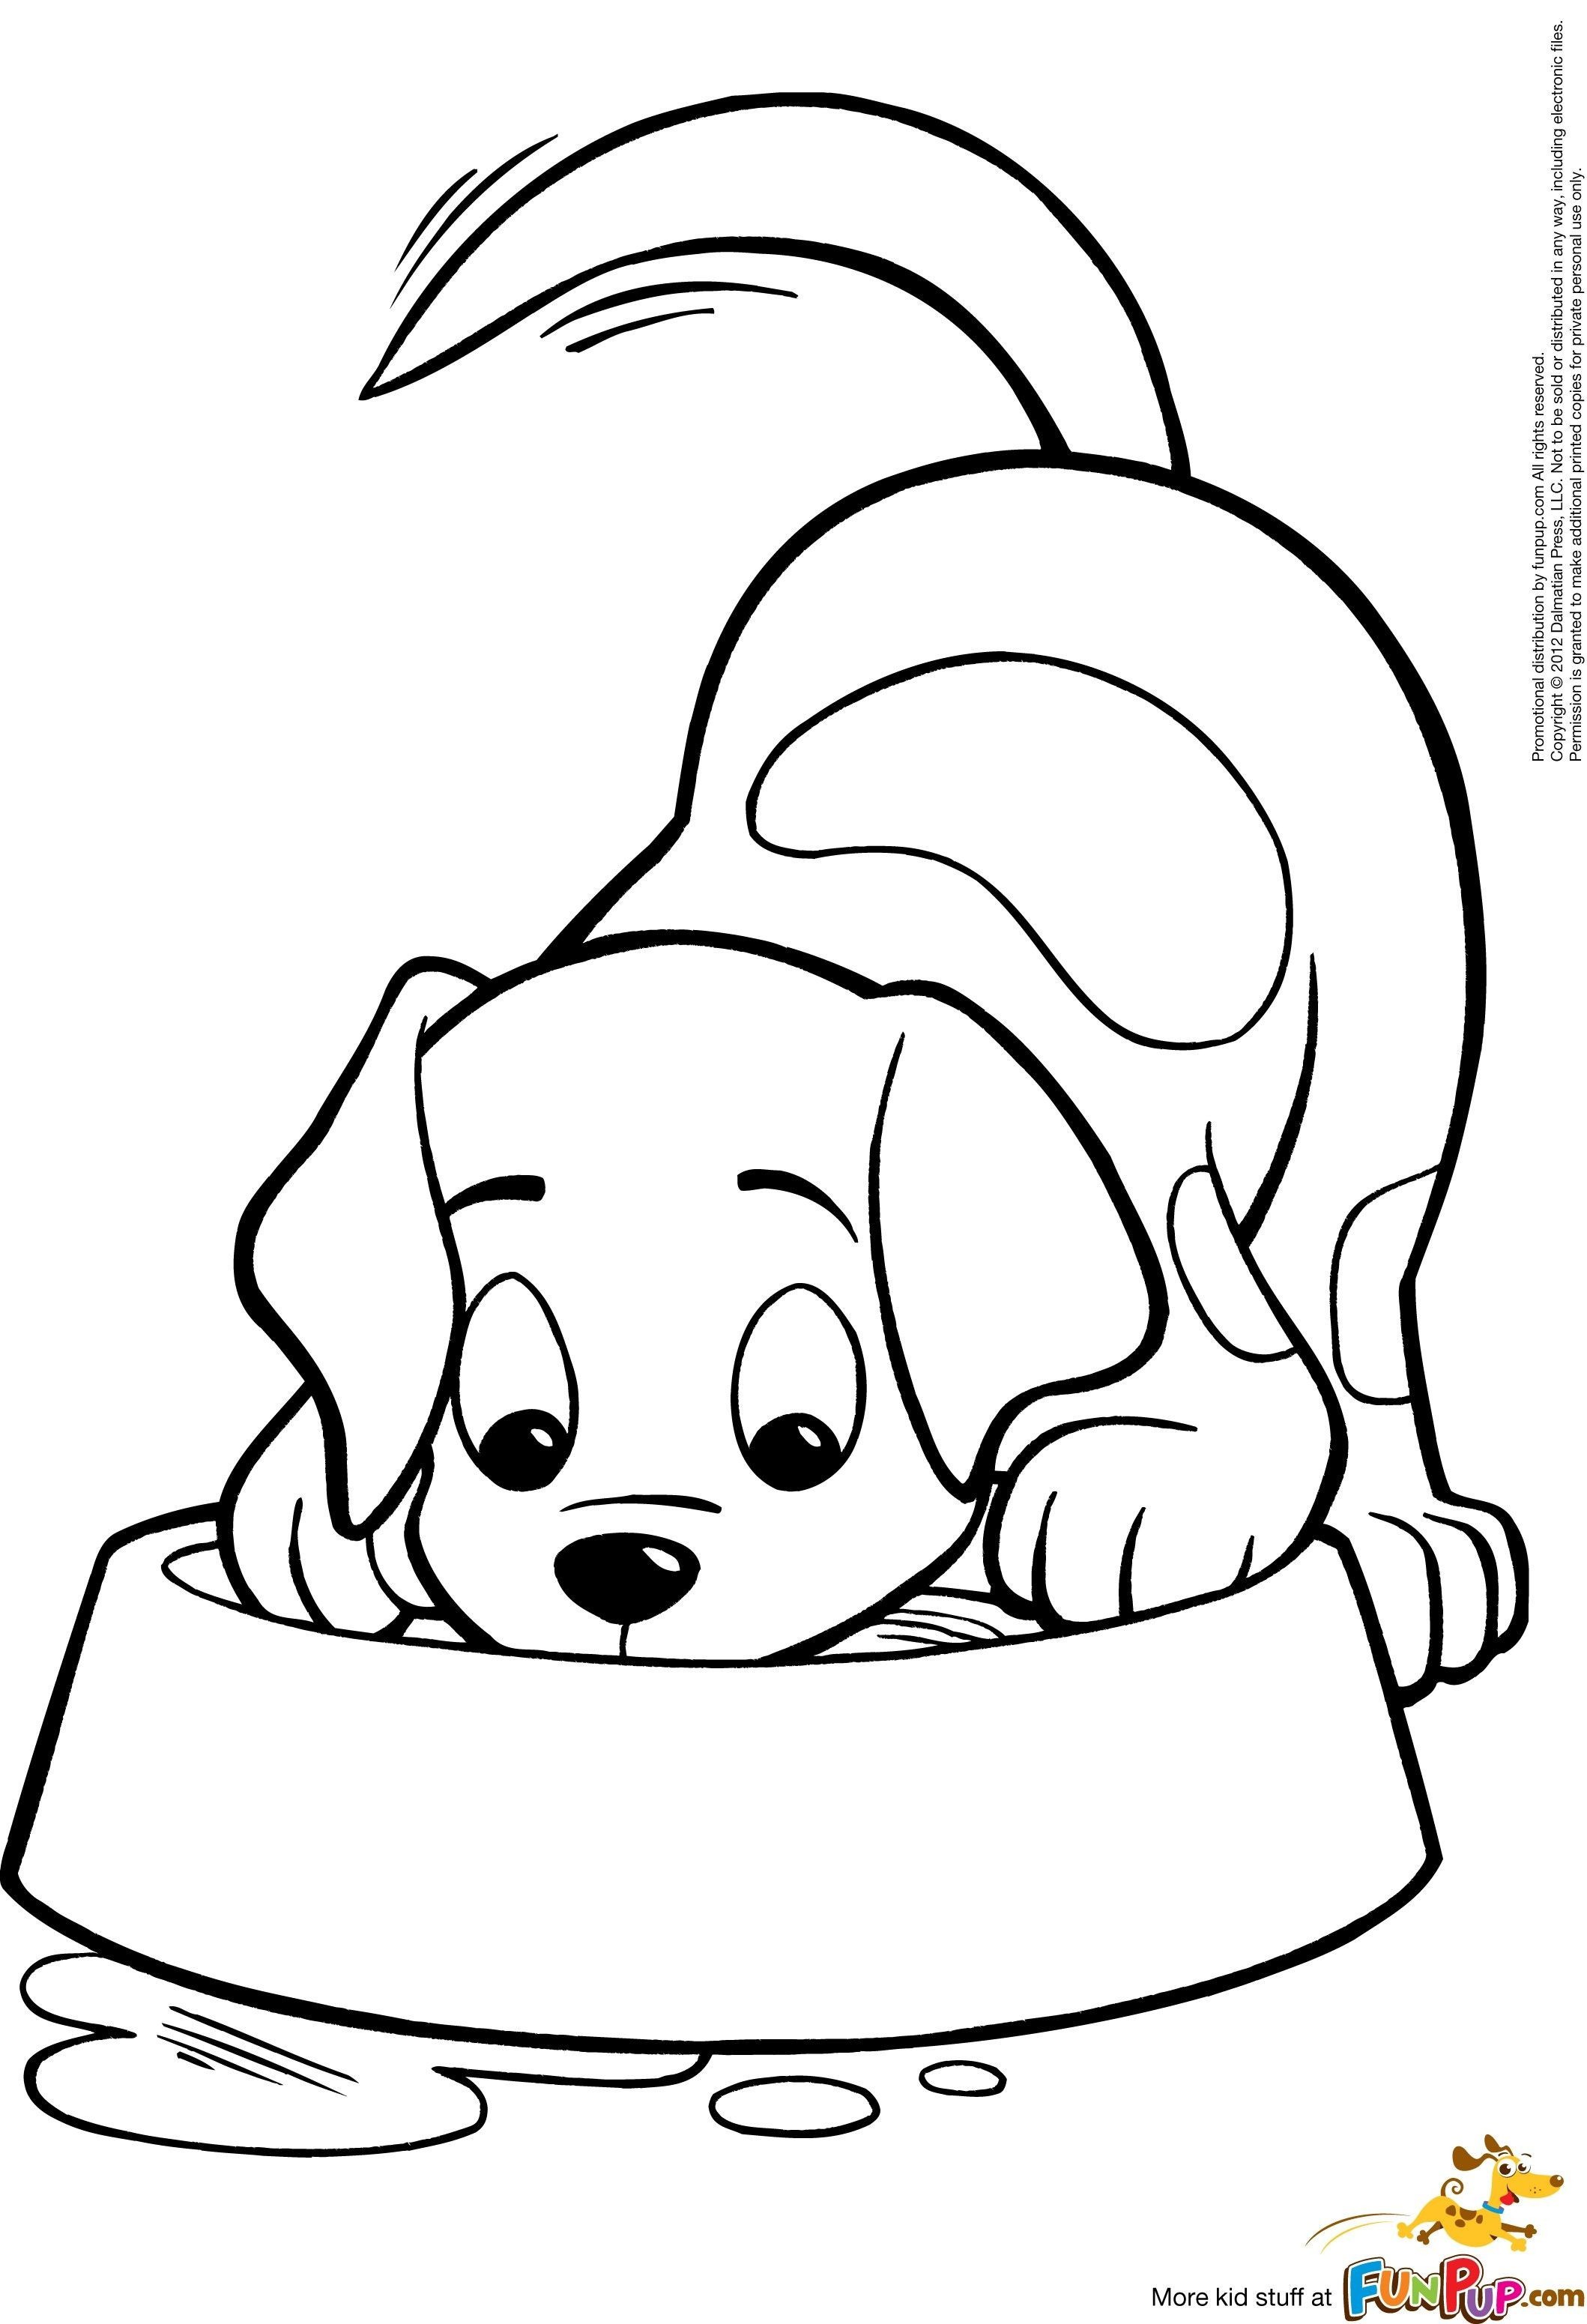 Puppy Coloring Pages Lovely Puppy Coloring Pages Lovely Printable Od Dog Coloring Pages Free